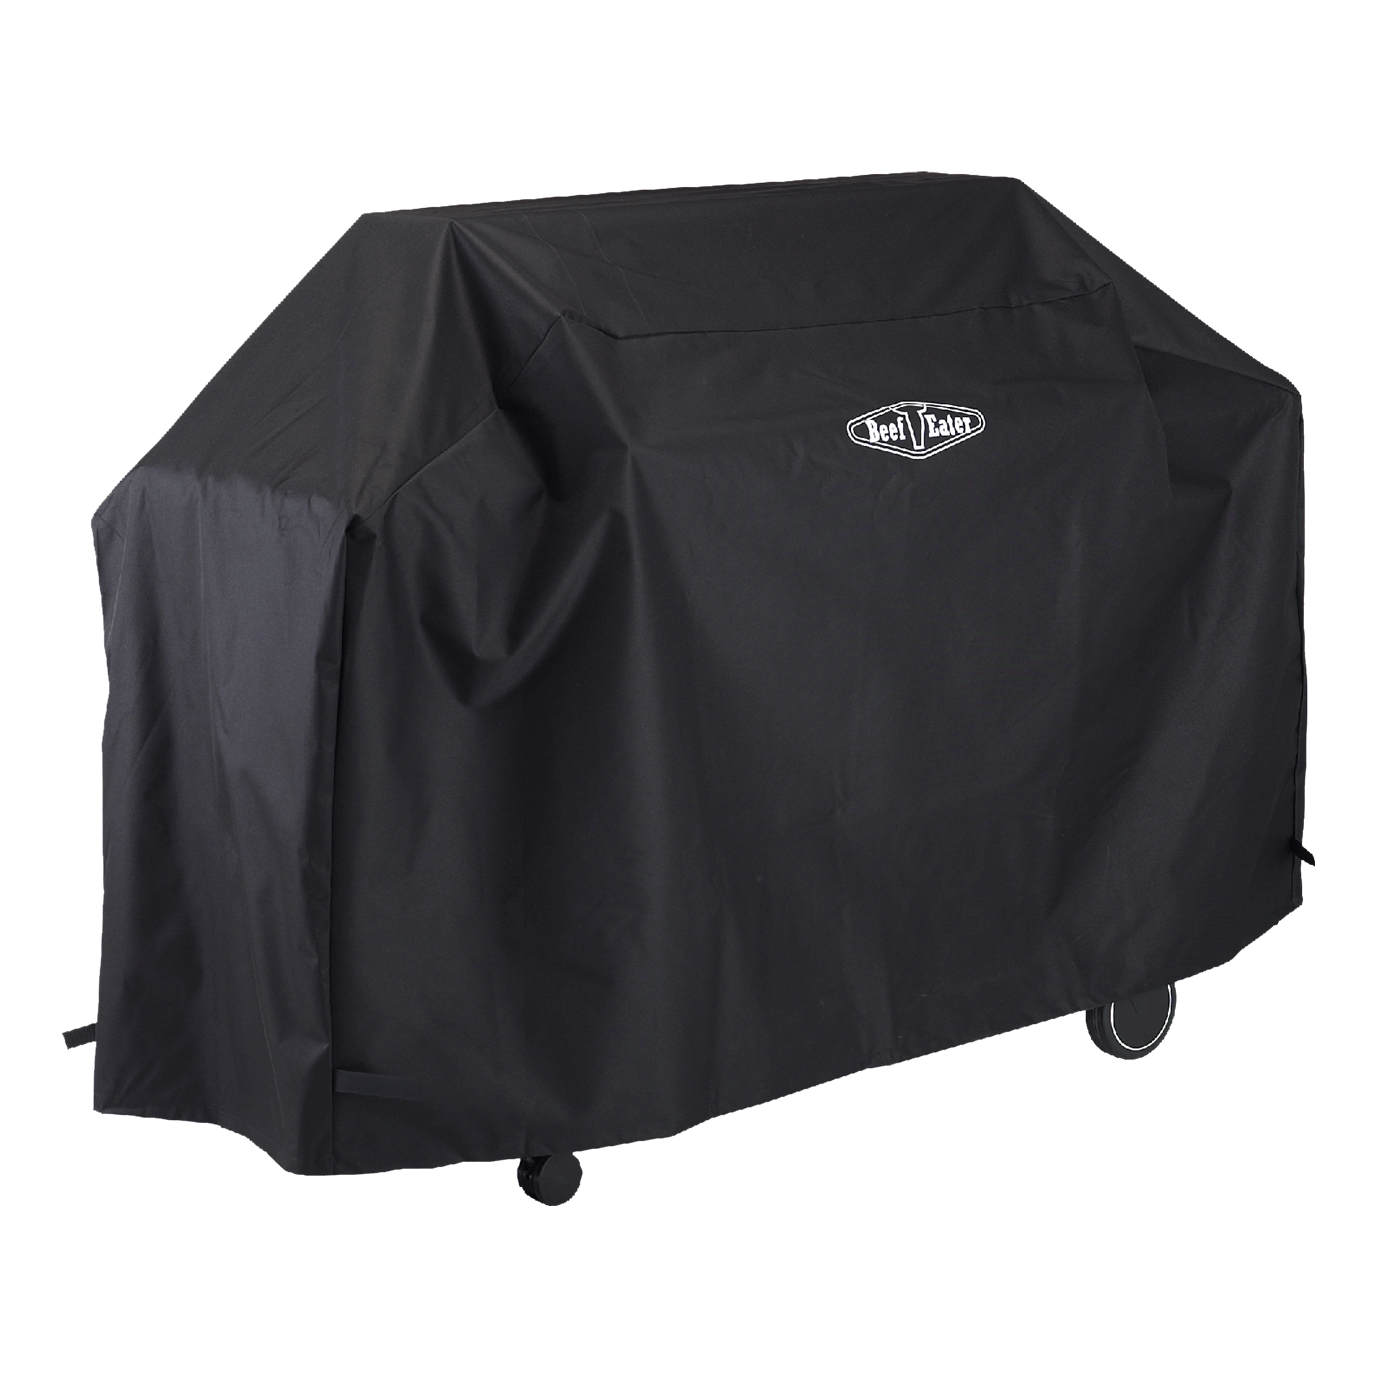 Beefeater All Weather BBQ Cover - 1500 / 1600 series 5 burner